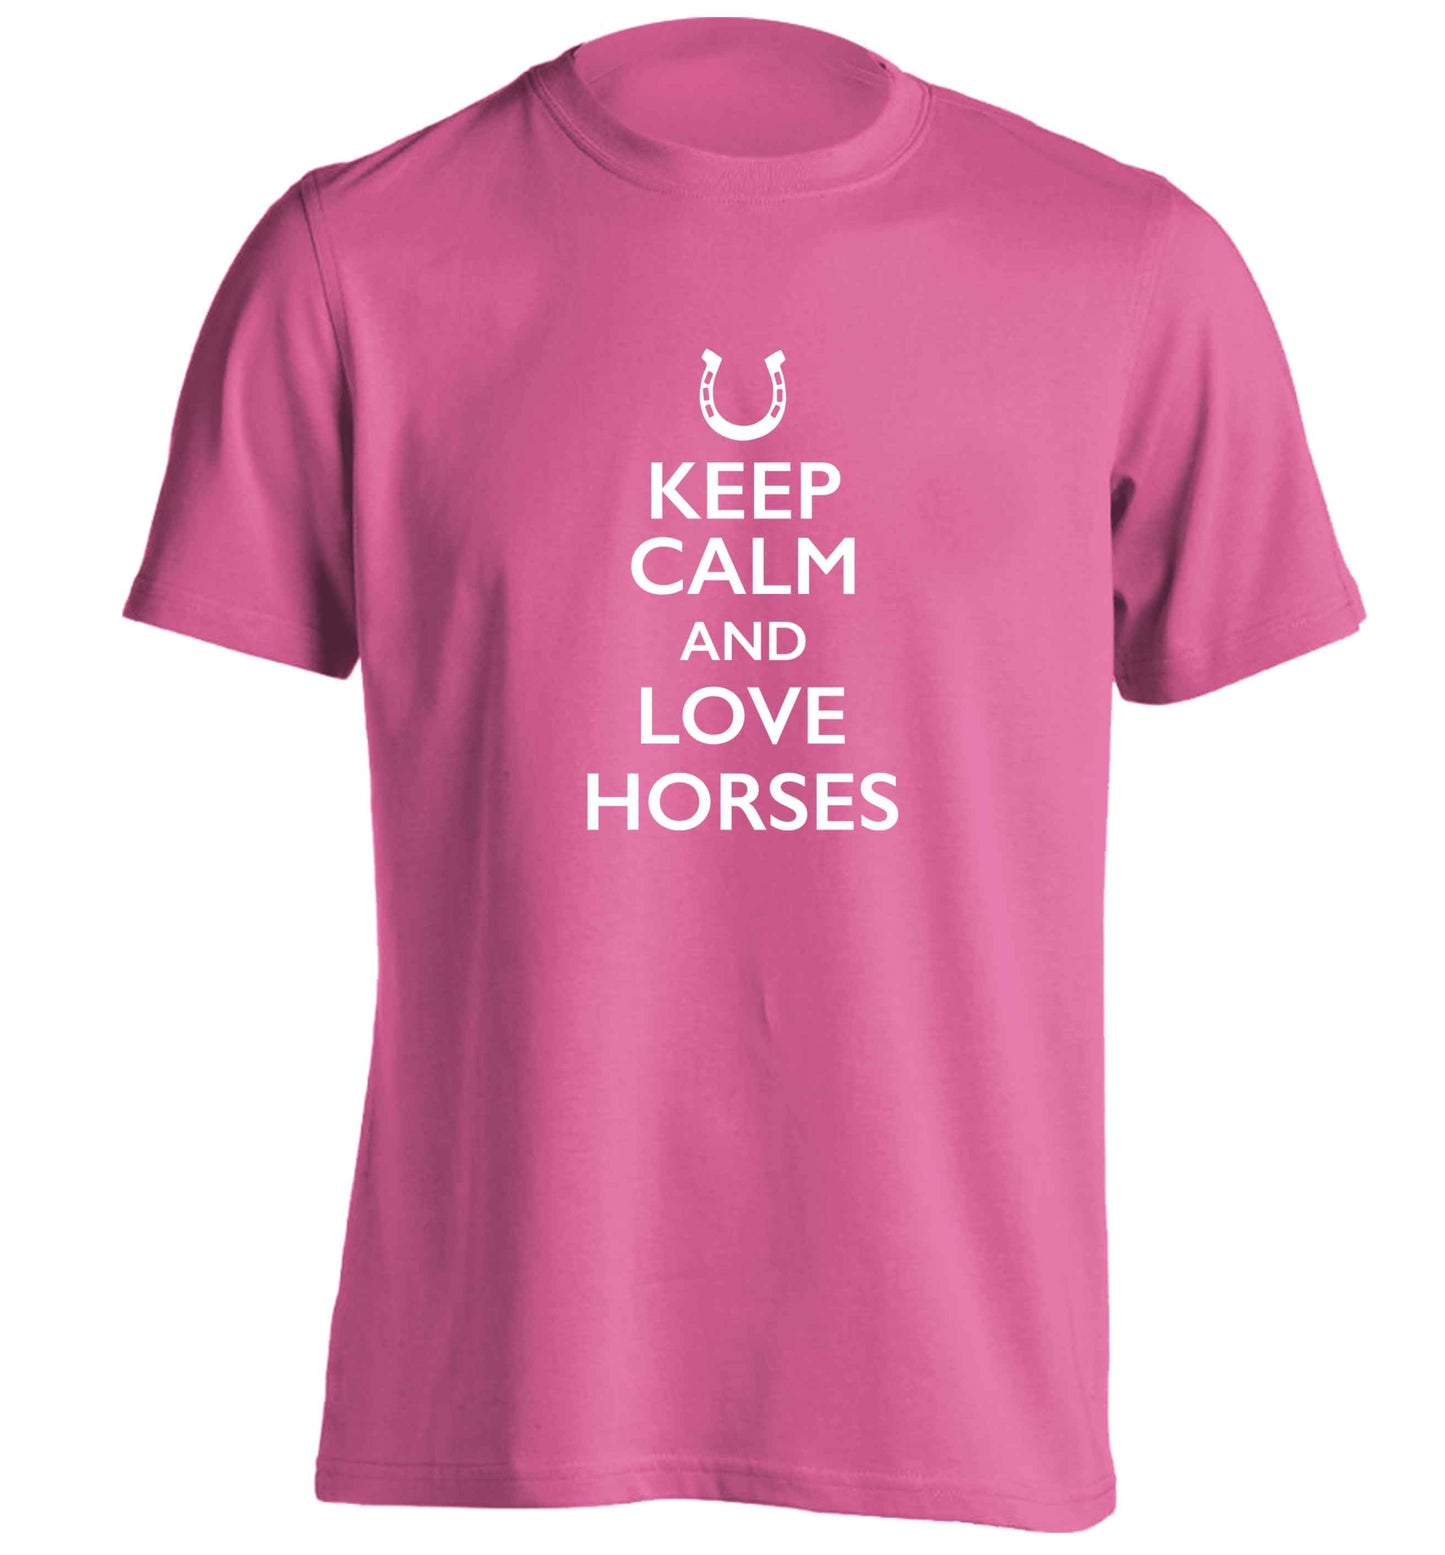 Keep calm and love horses adults unisex pink Tshirt 2XL